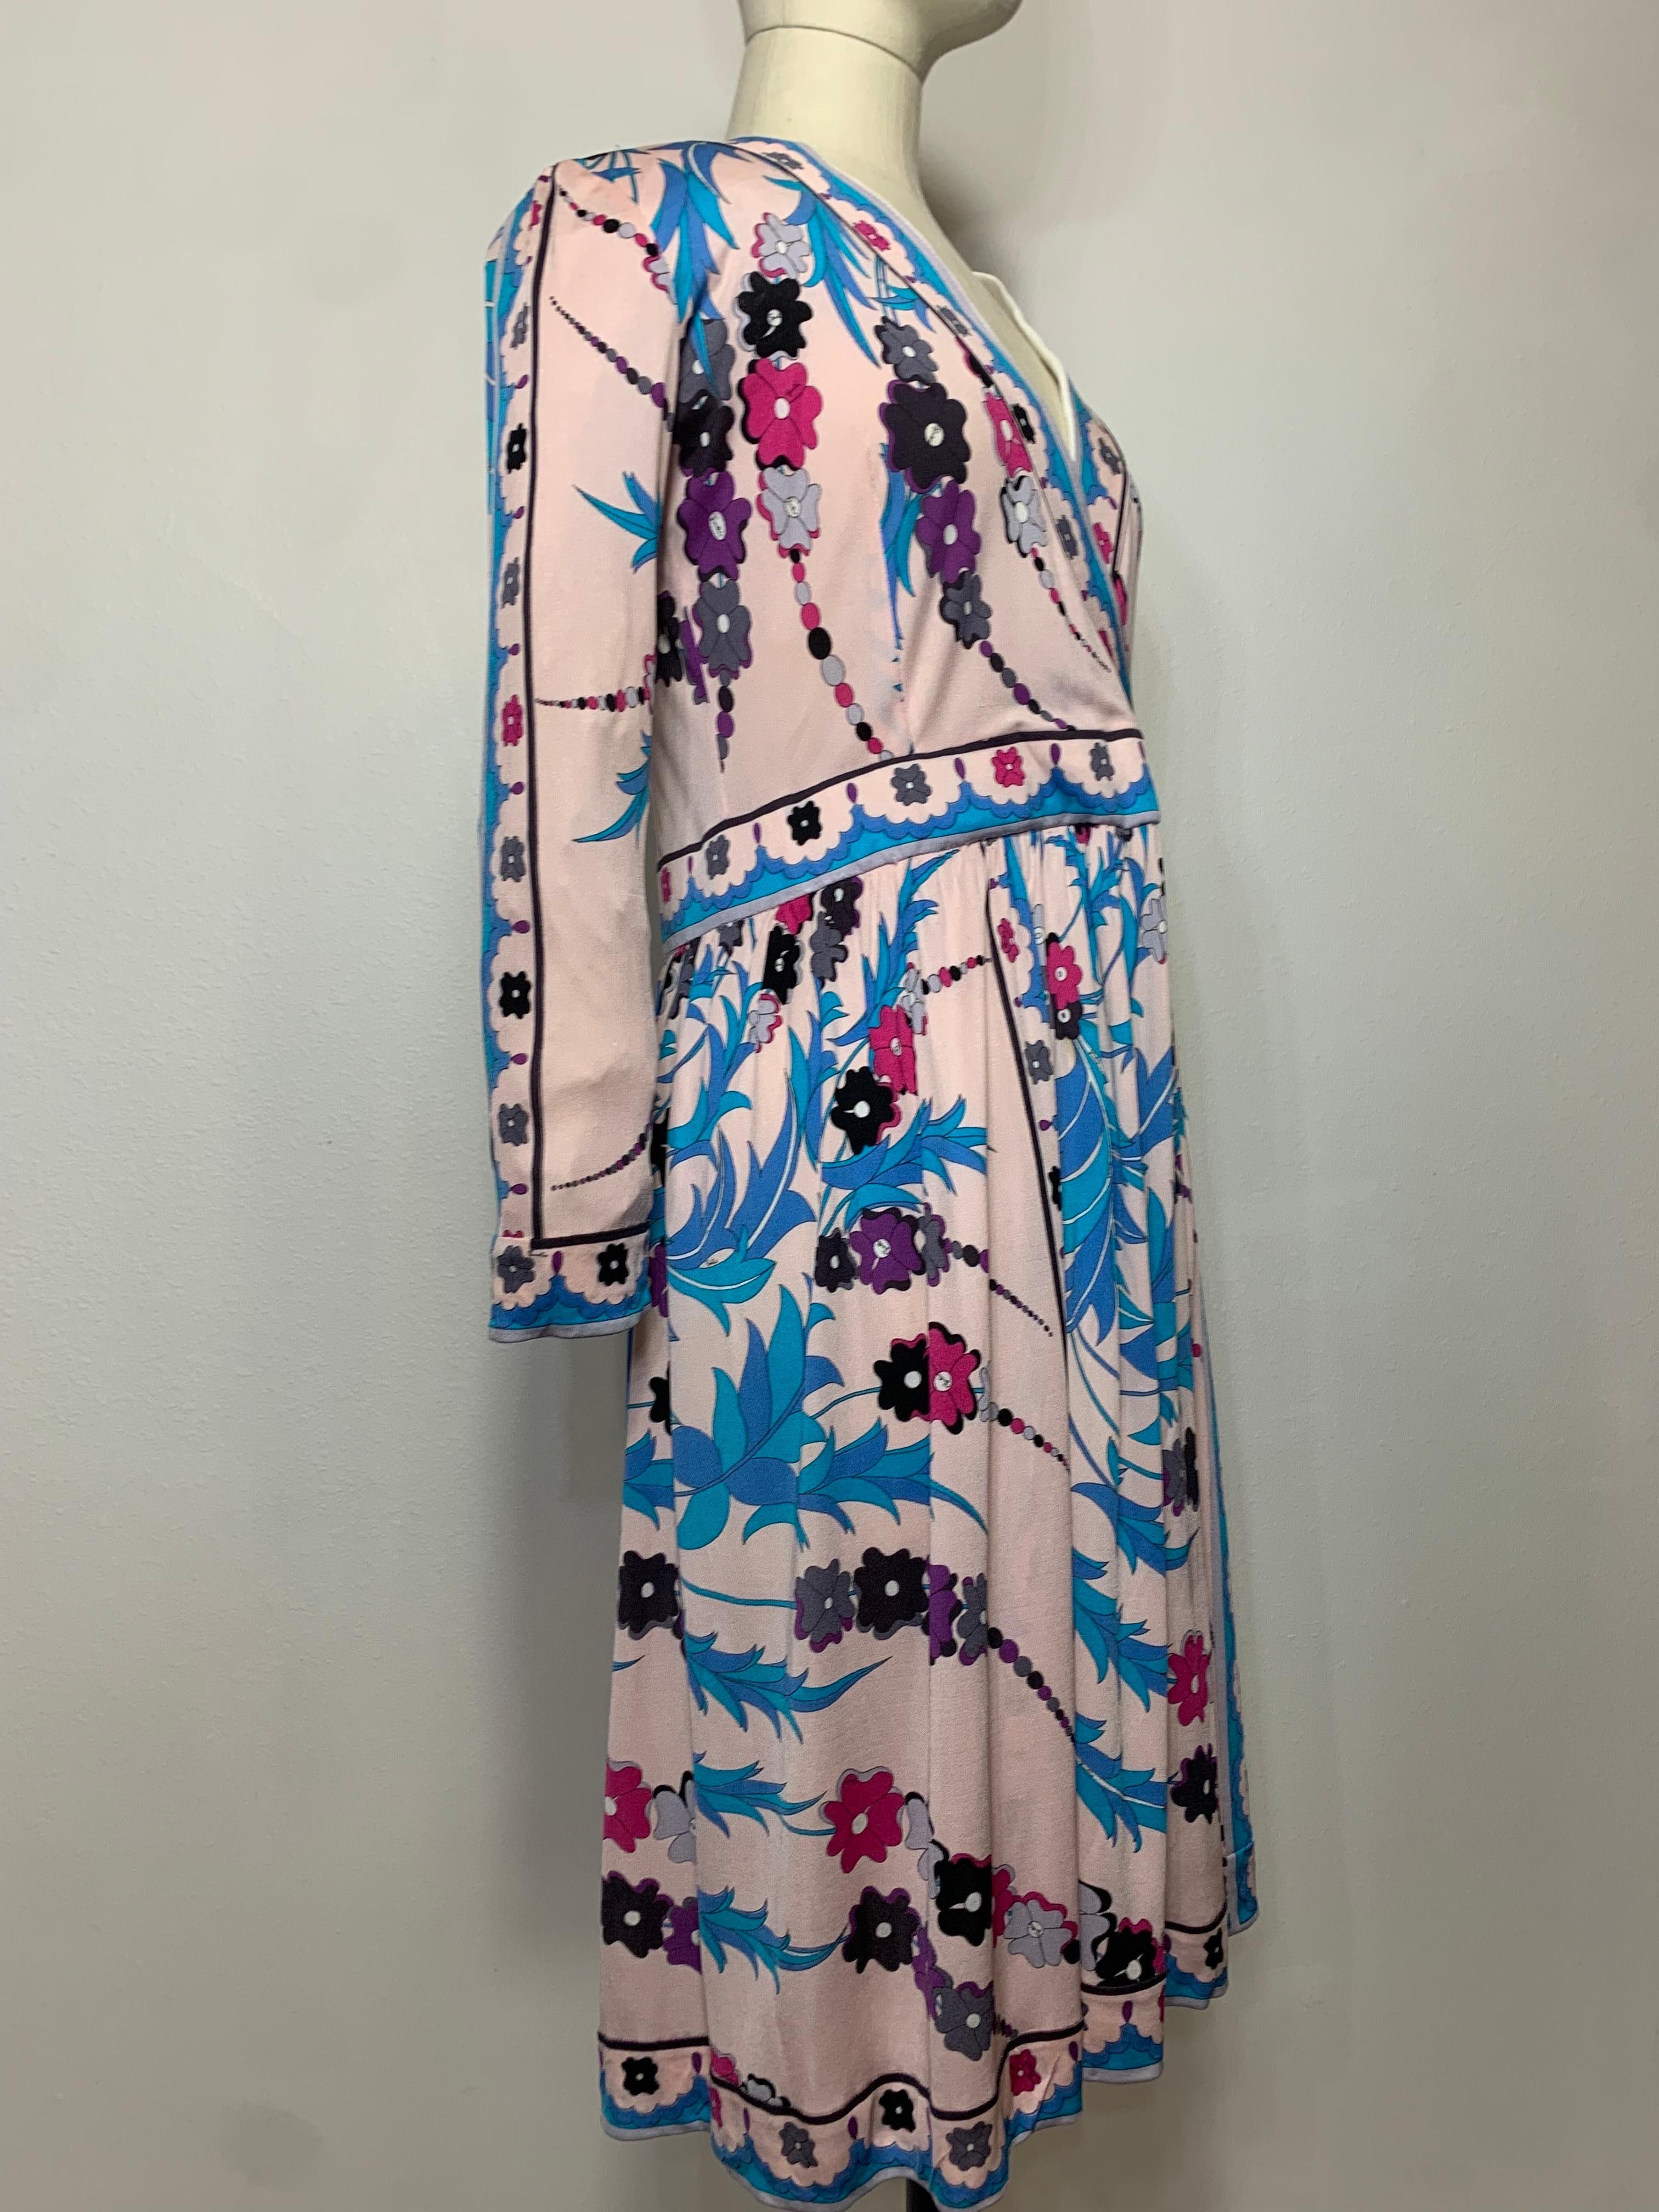 1970s Emilio Pucci Silk Jersey Floral Print Faux-Wrap Dress w Full Skirt & Banded Hem and Sleeve Trim: An unusual print in pale pink with stylized gladiolas in turquoise, purple and black. Coordinating banded waist,  neckline, hem and cuffs.